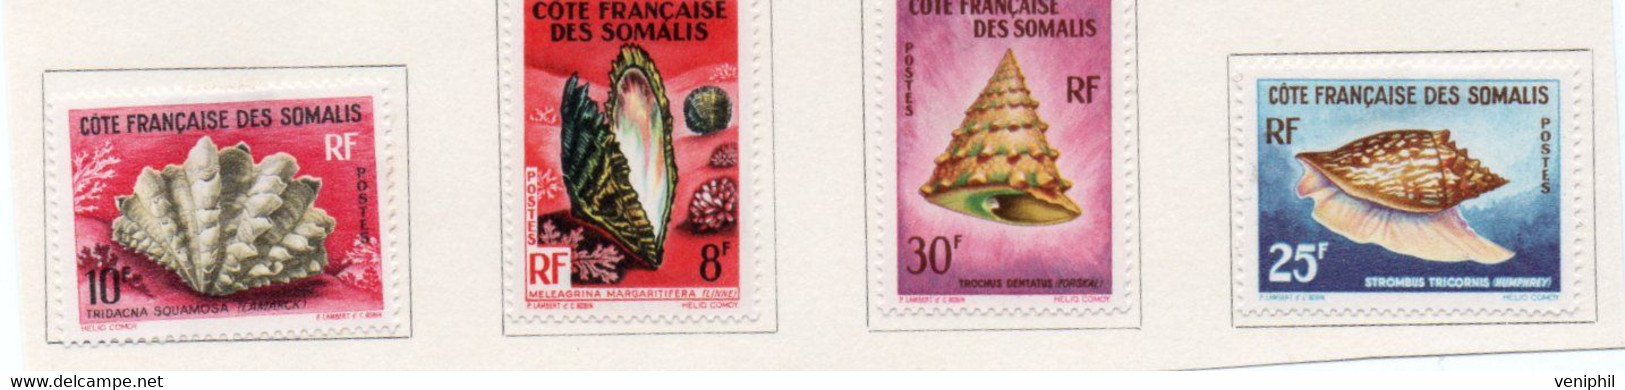 COTE FRANCAISE DES SOMALIS - SERIE COQUILLAGES - N° 311 A 314  - NEUF CHARNIERE -ANNEE 1962 - Nuevos